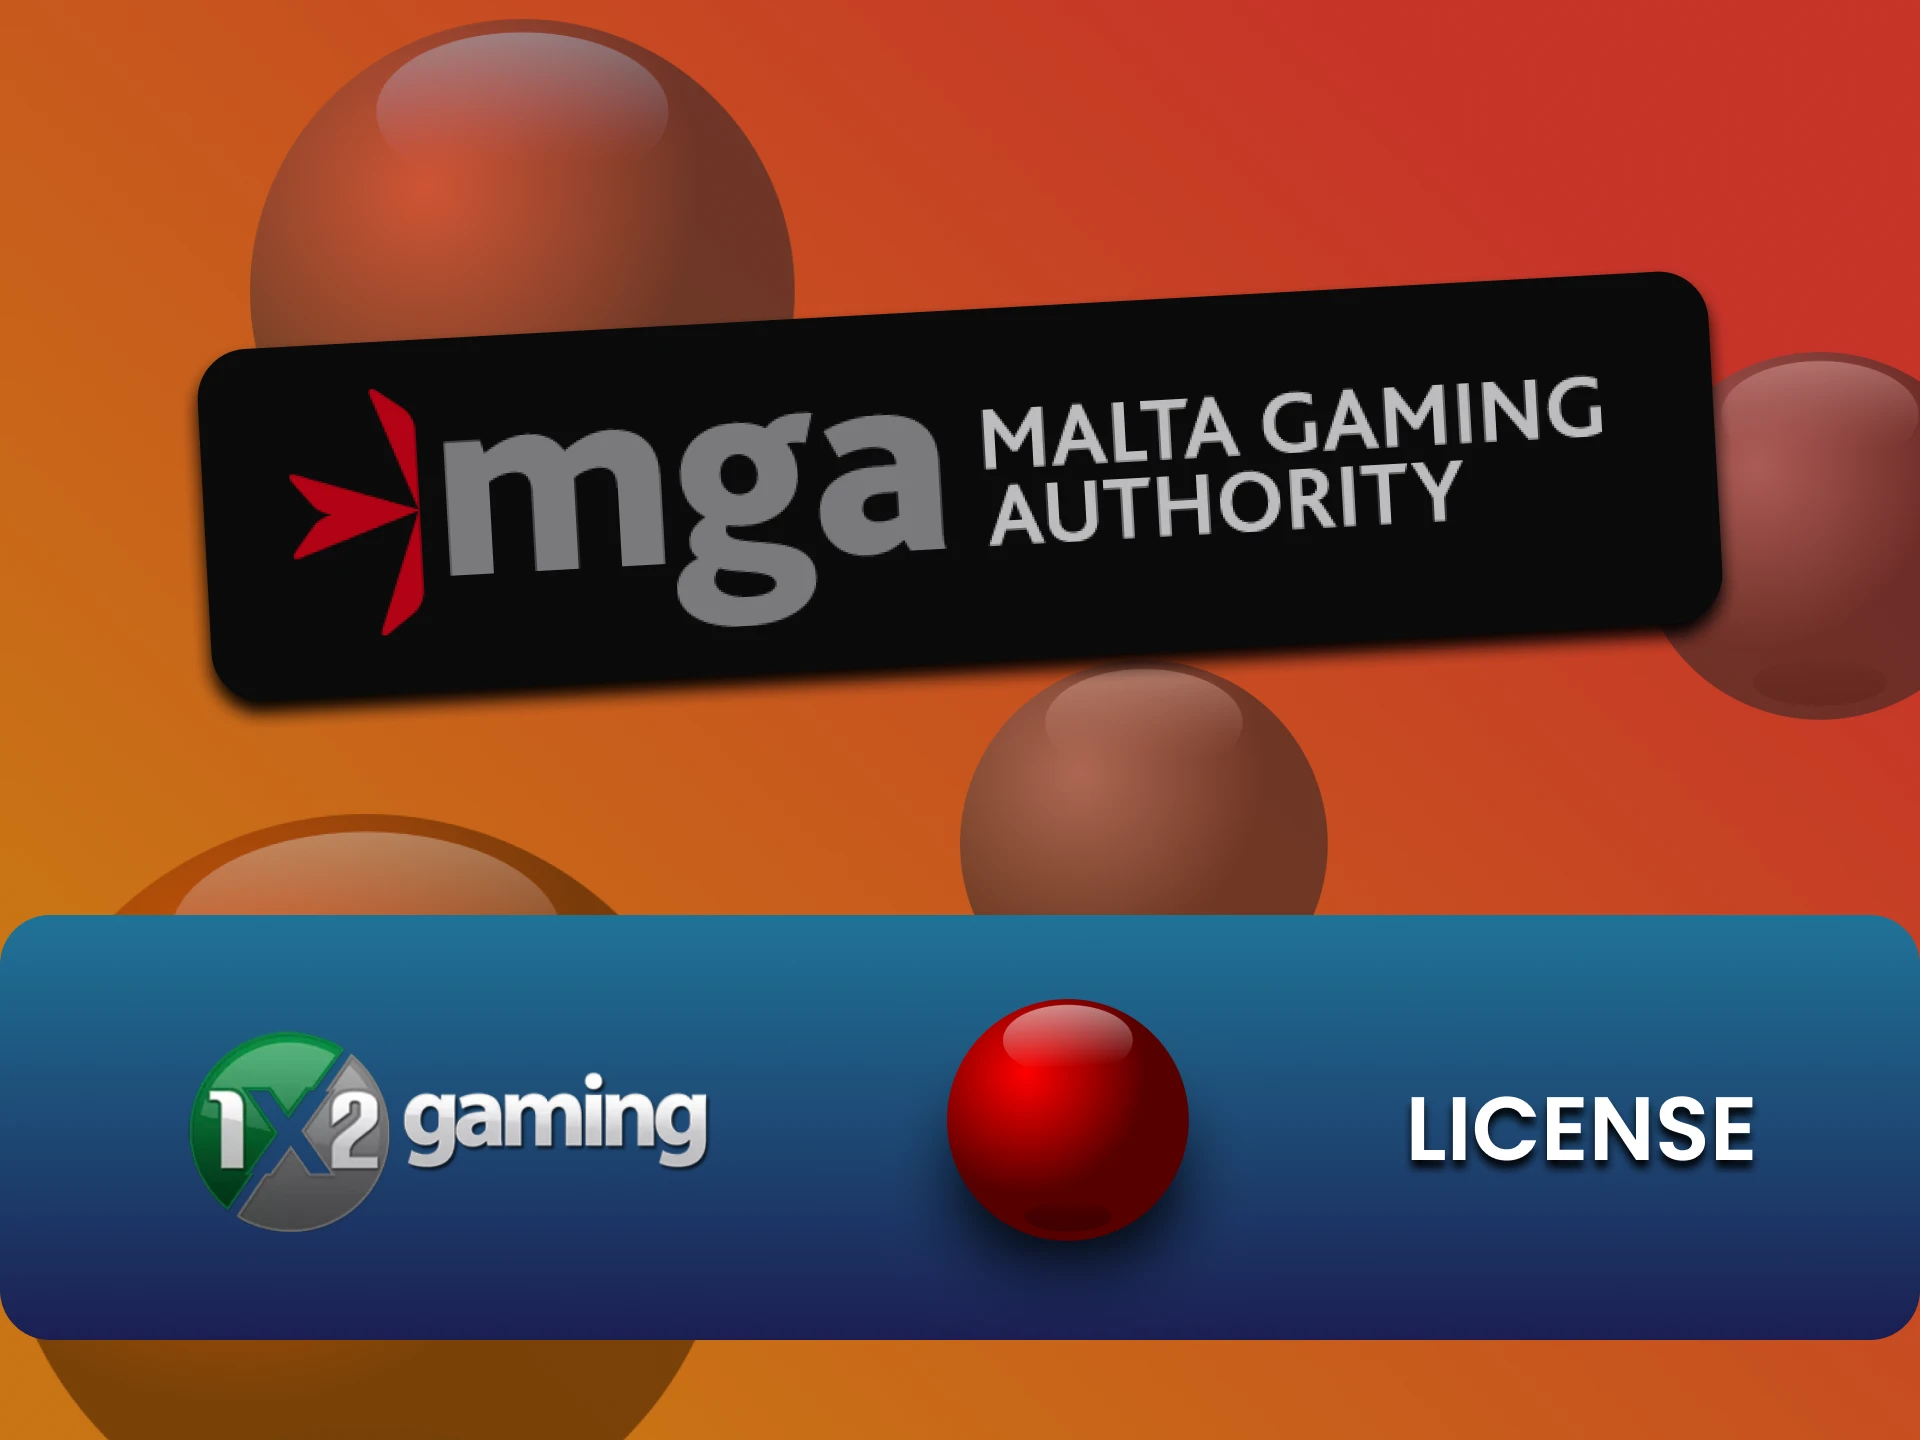 1x2 gaming has a special gaming license.